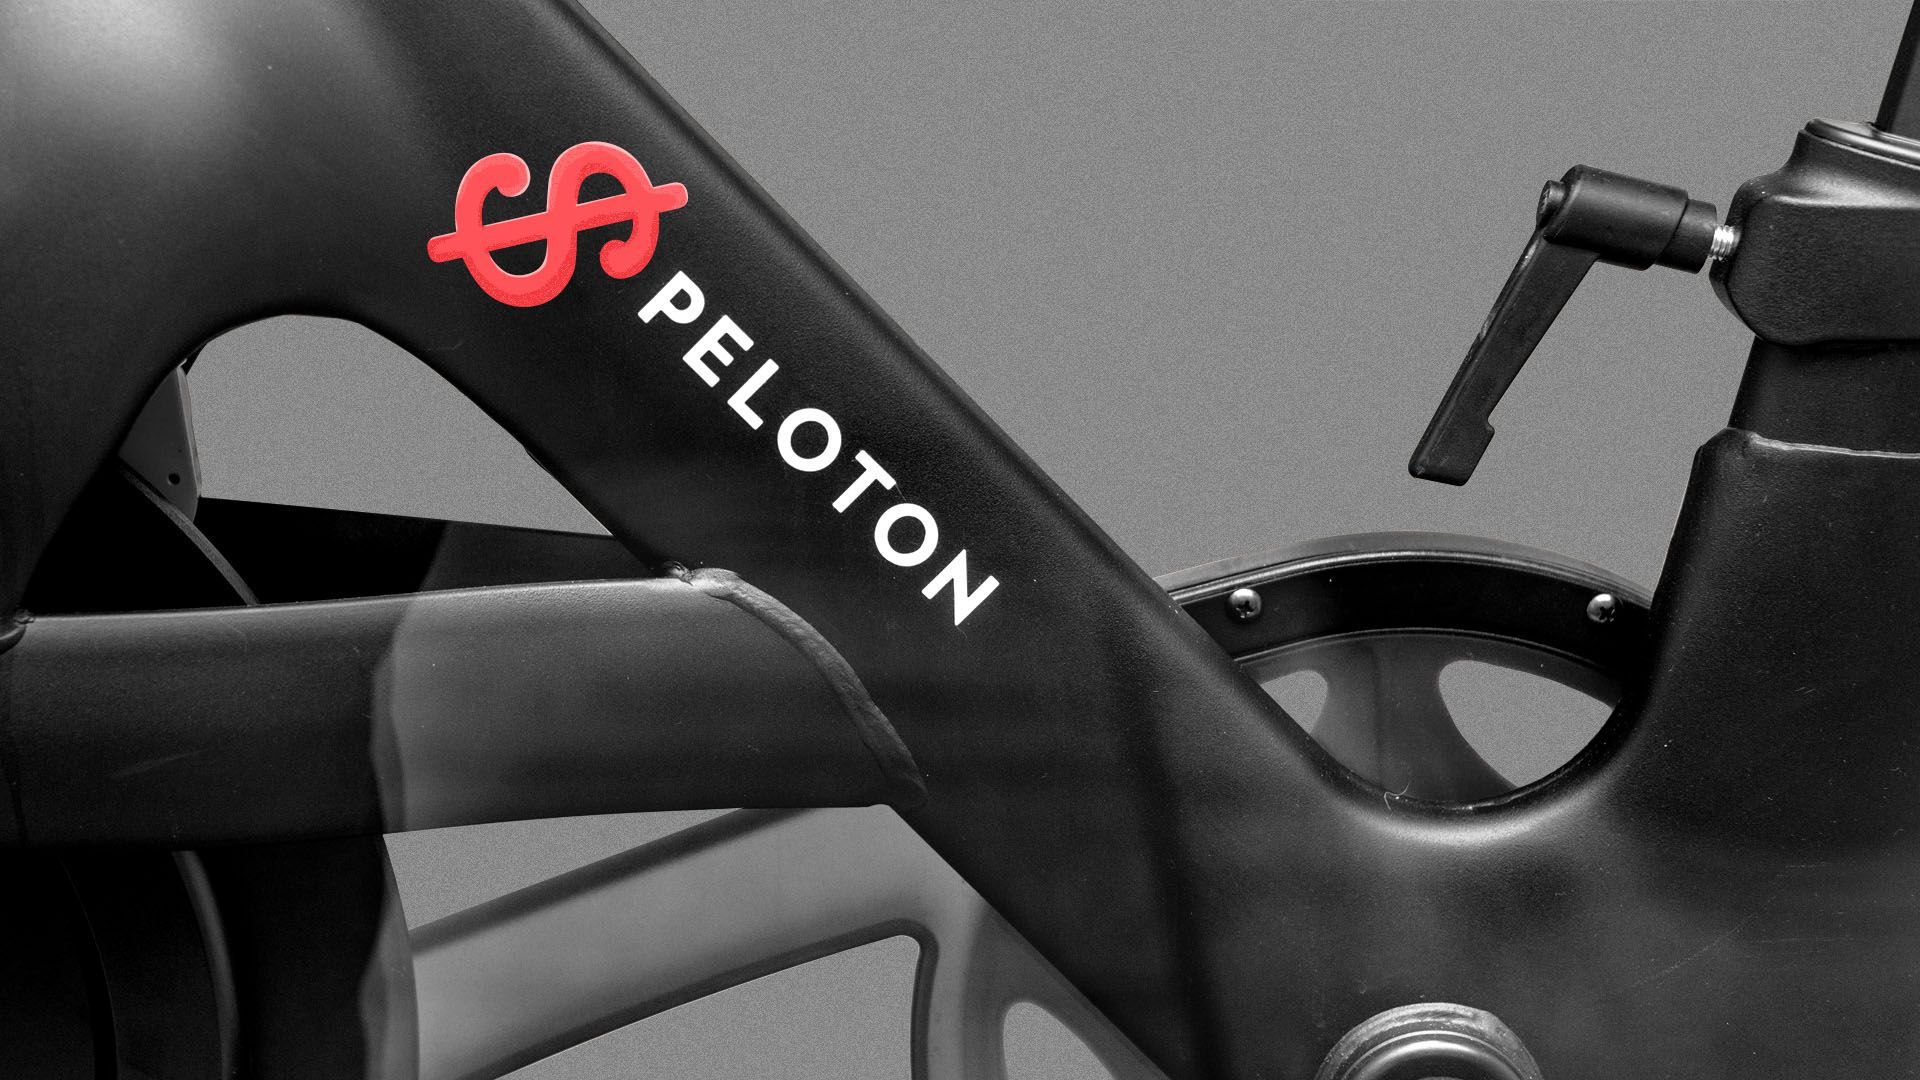 Illustration of a Peloton bike with the logo replaced by a dollar sign.